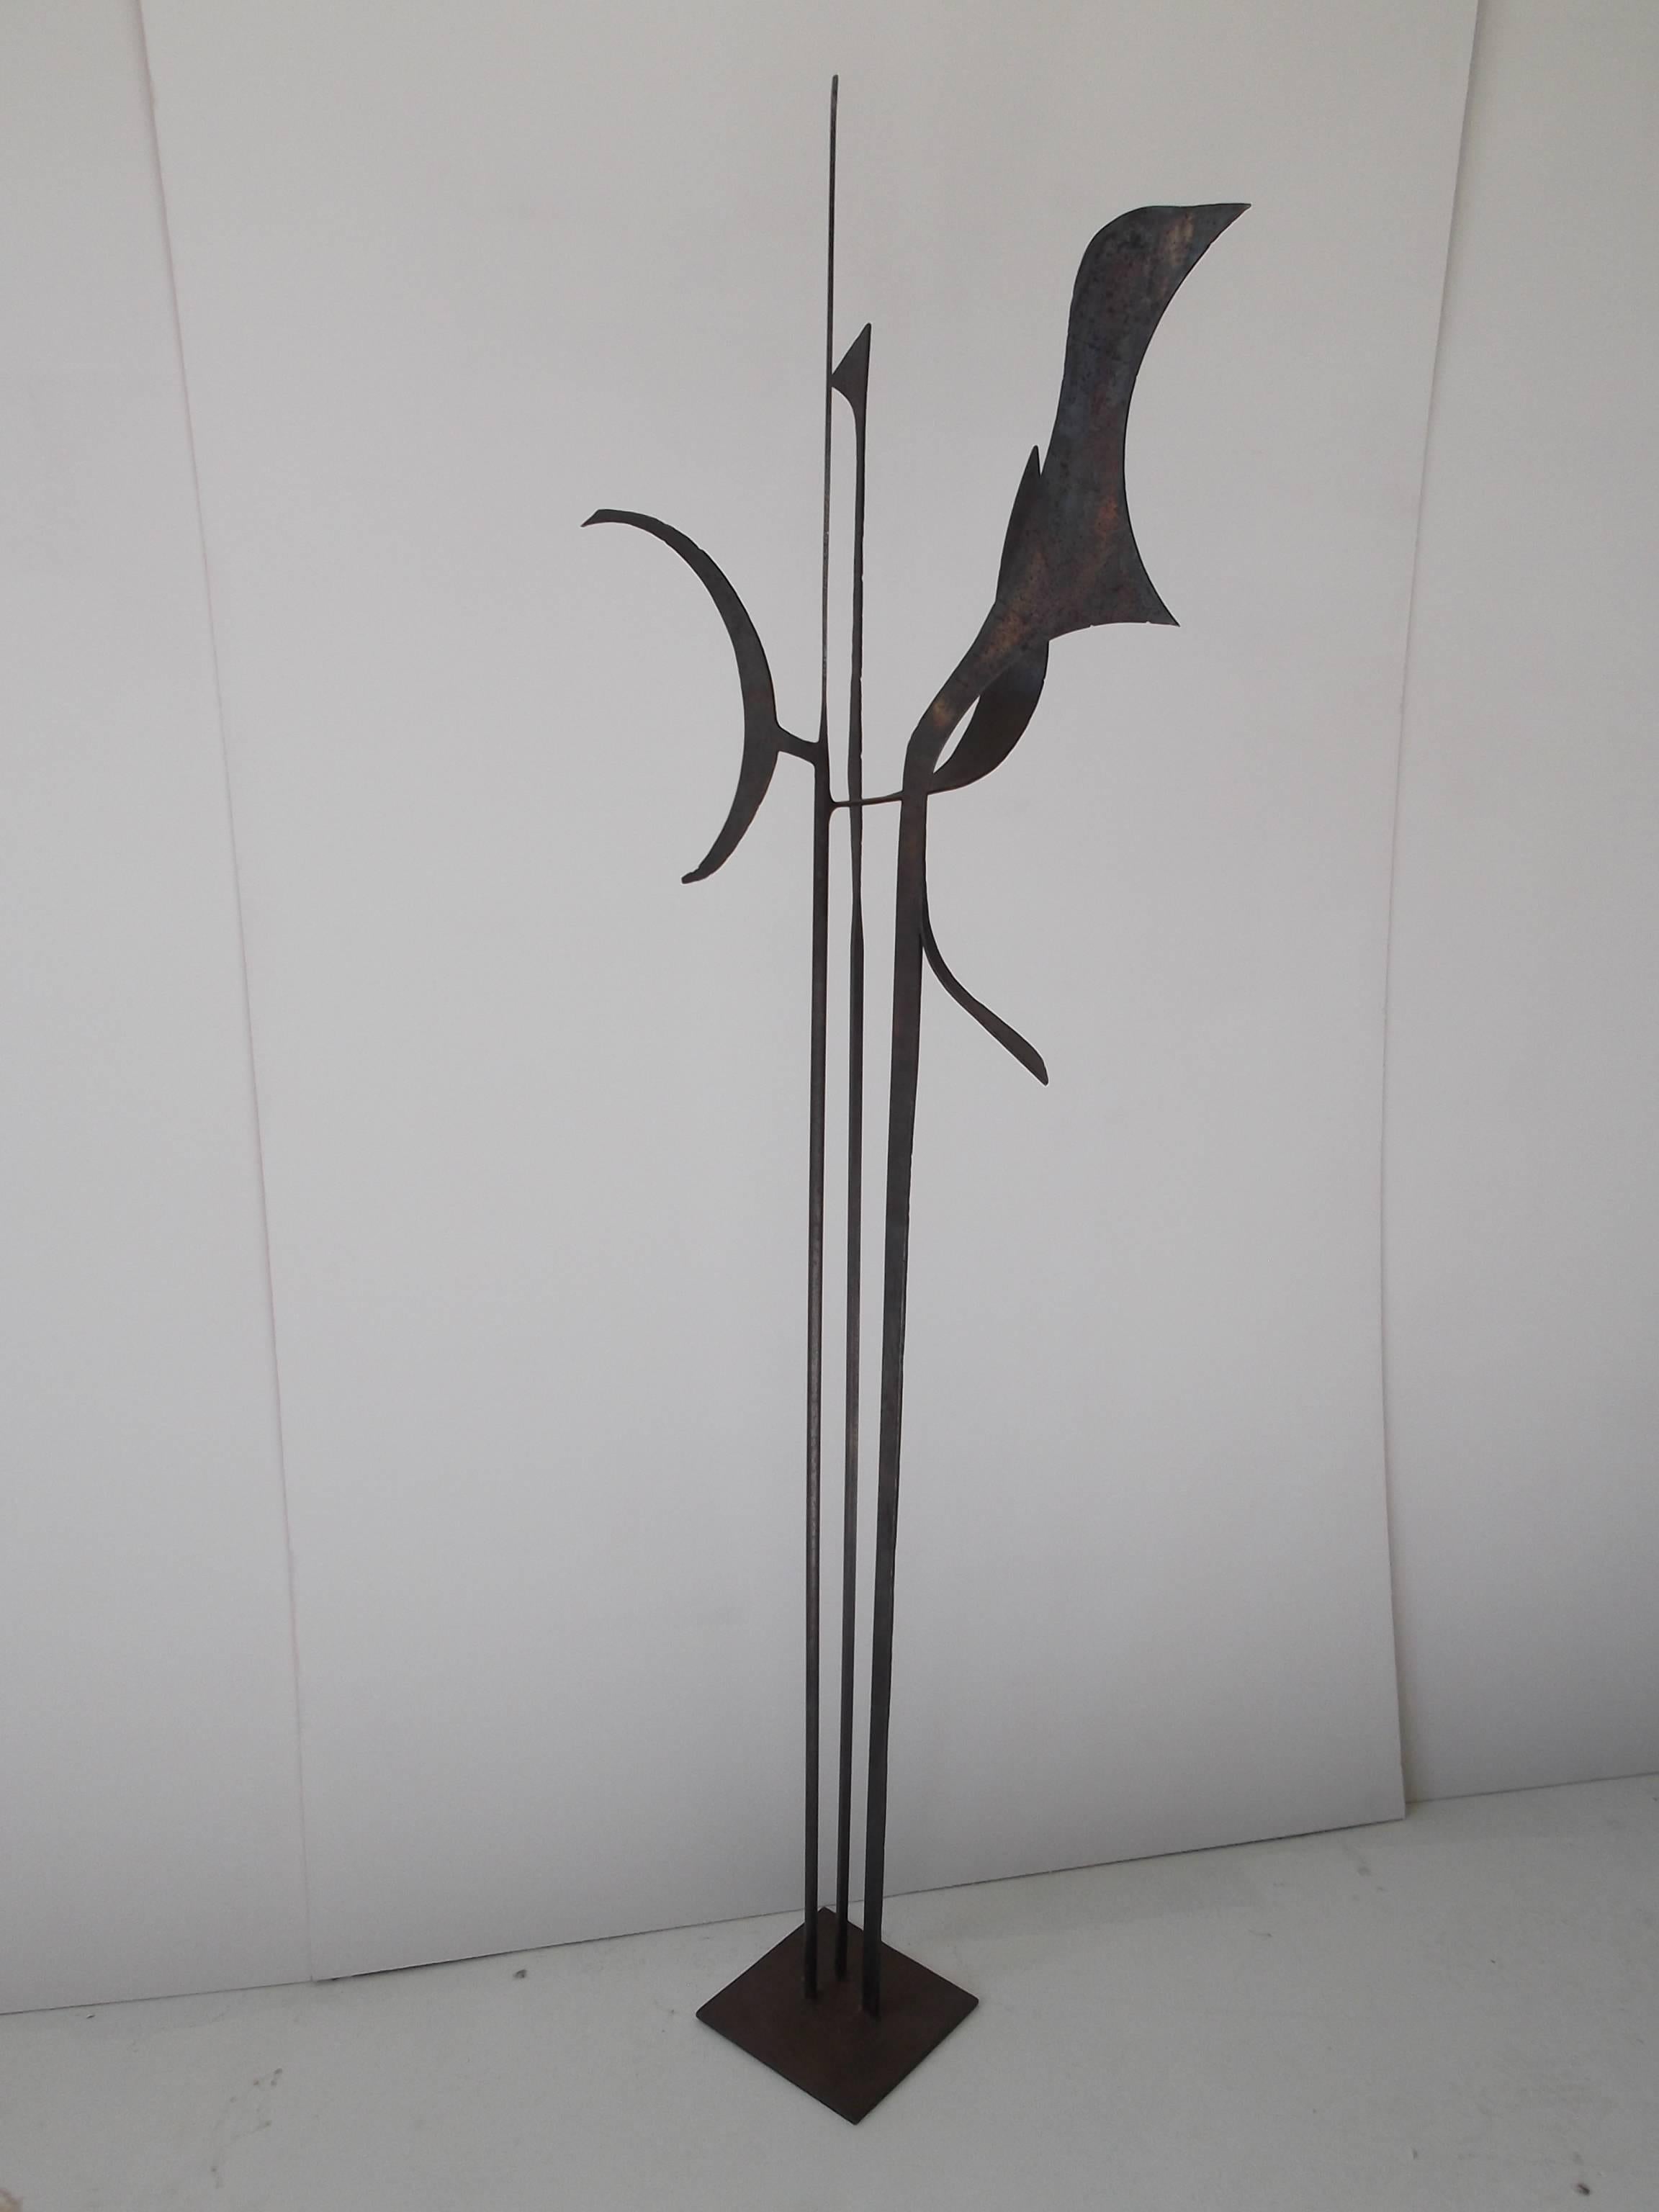 American Signed 1963 Jay J. McVicker Abstract Modernist Tall Welded Steel Sculpture For Sale